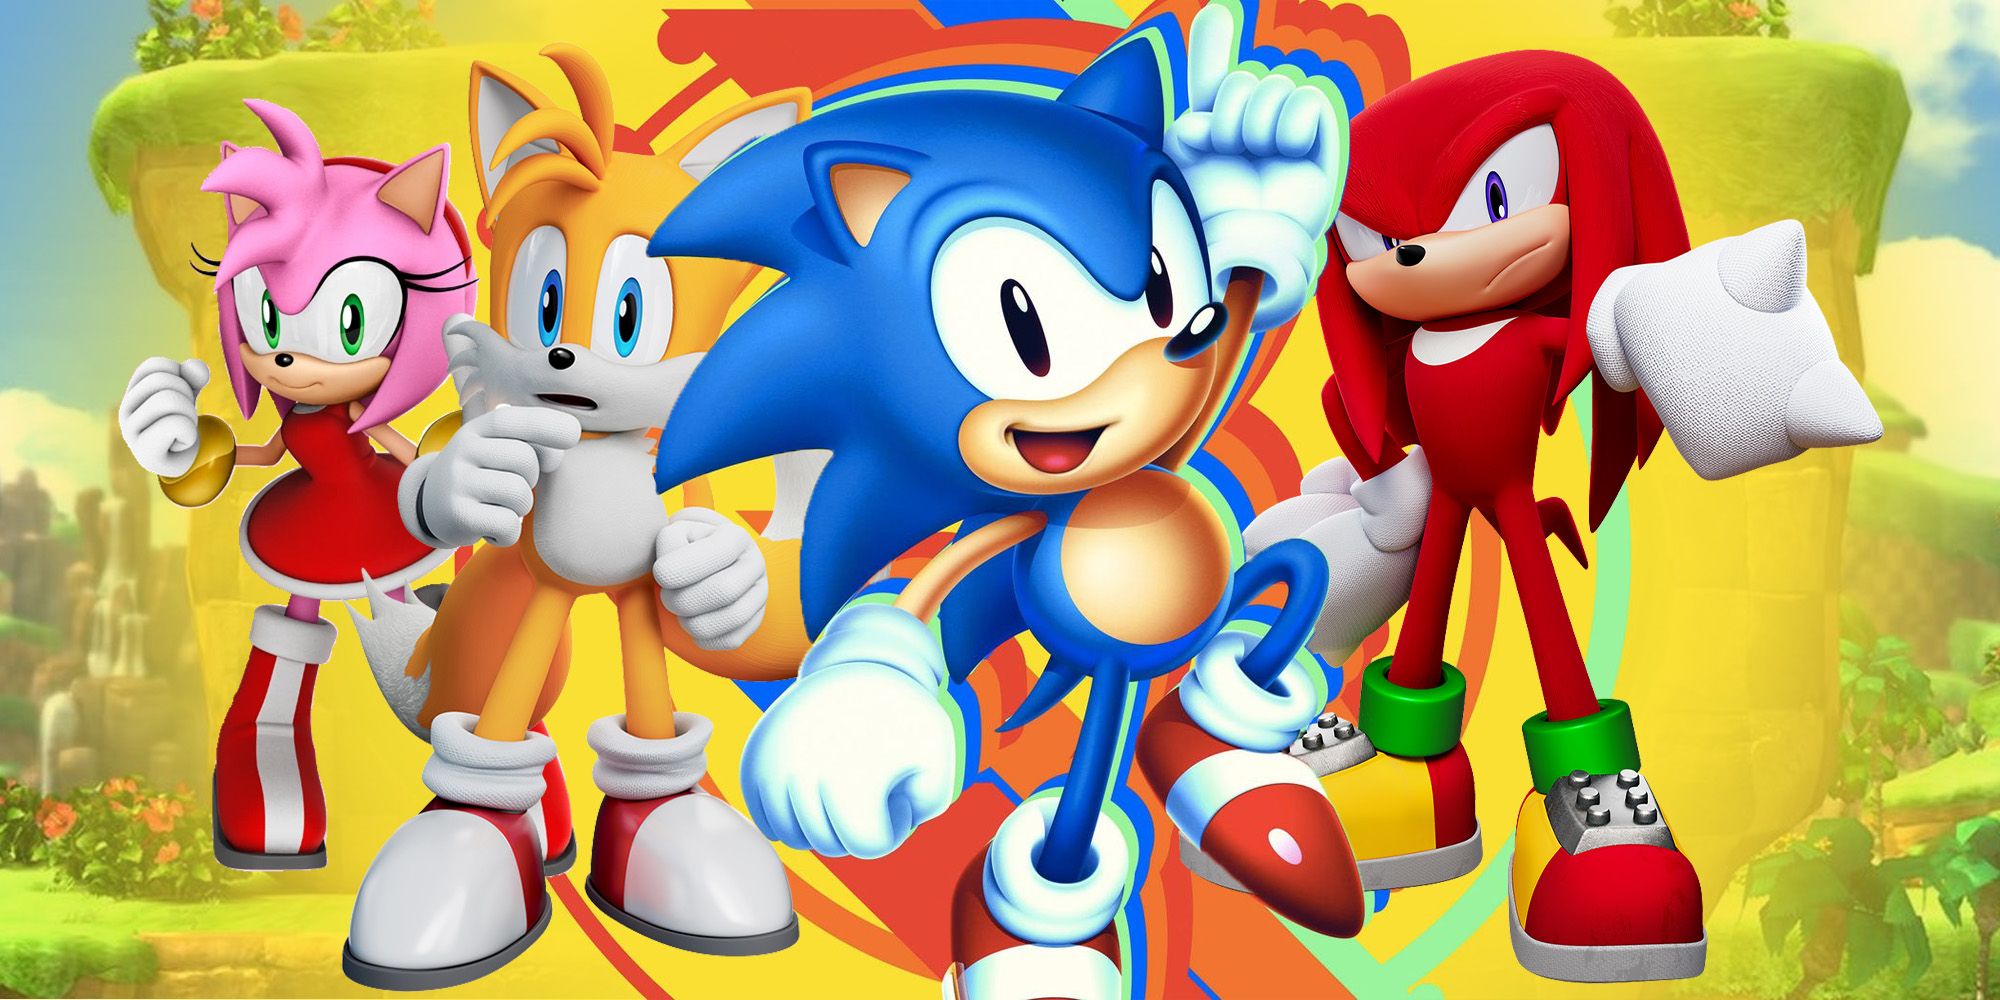 Sonic The Hedgehog 3 & The Knuckles Show Pay Off A 30-Year-Old Video Game Joke In The Most Hilarious Way